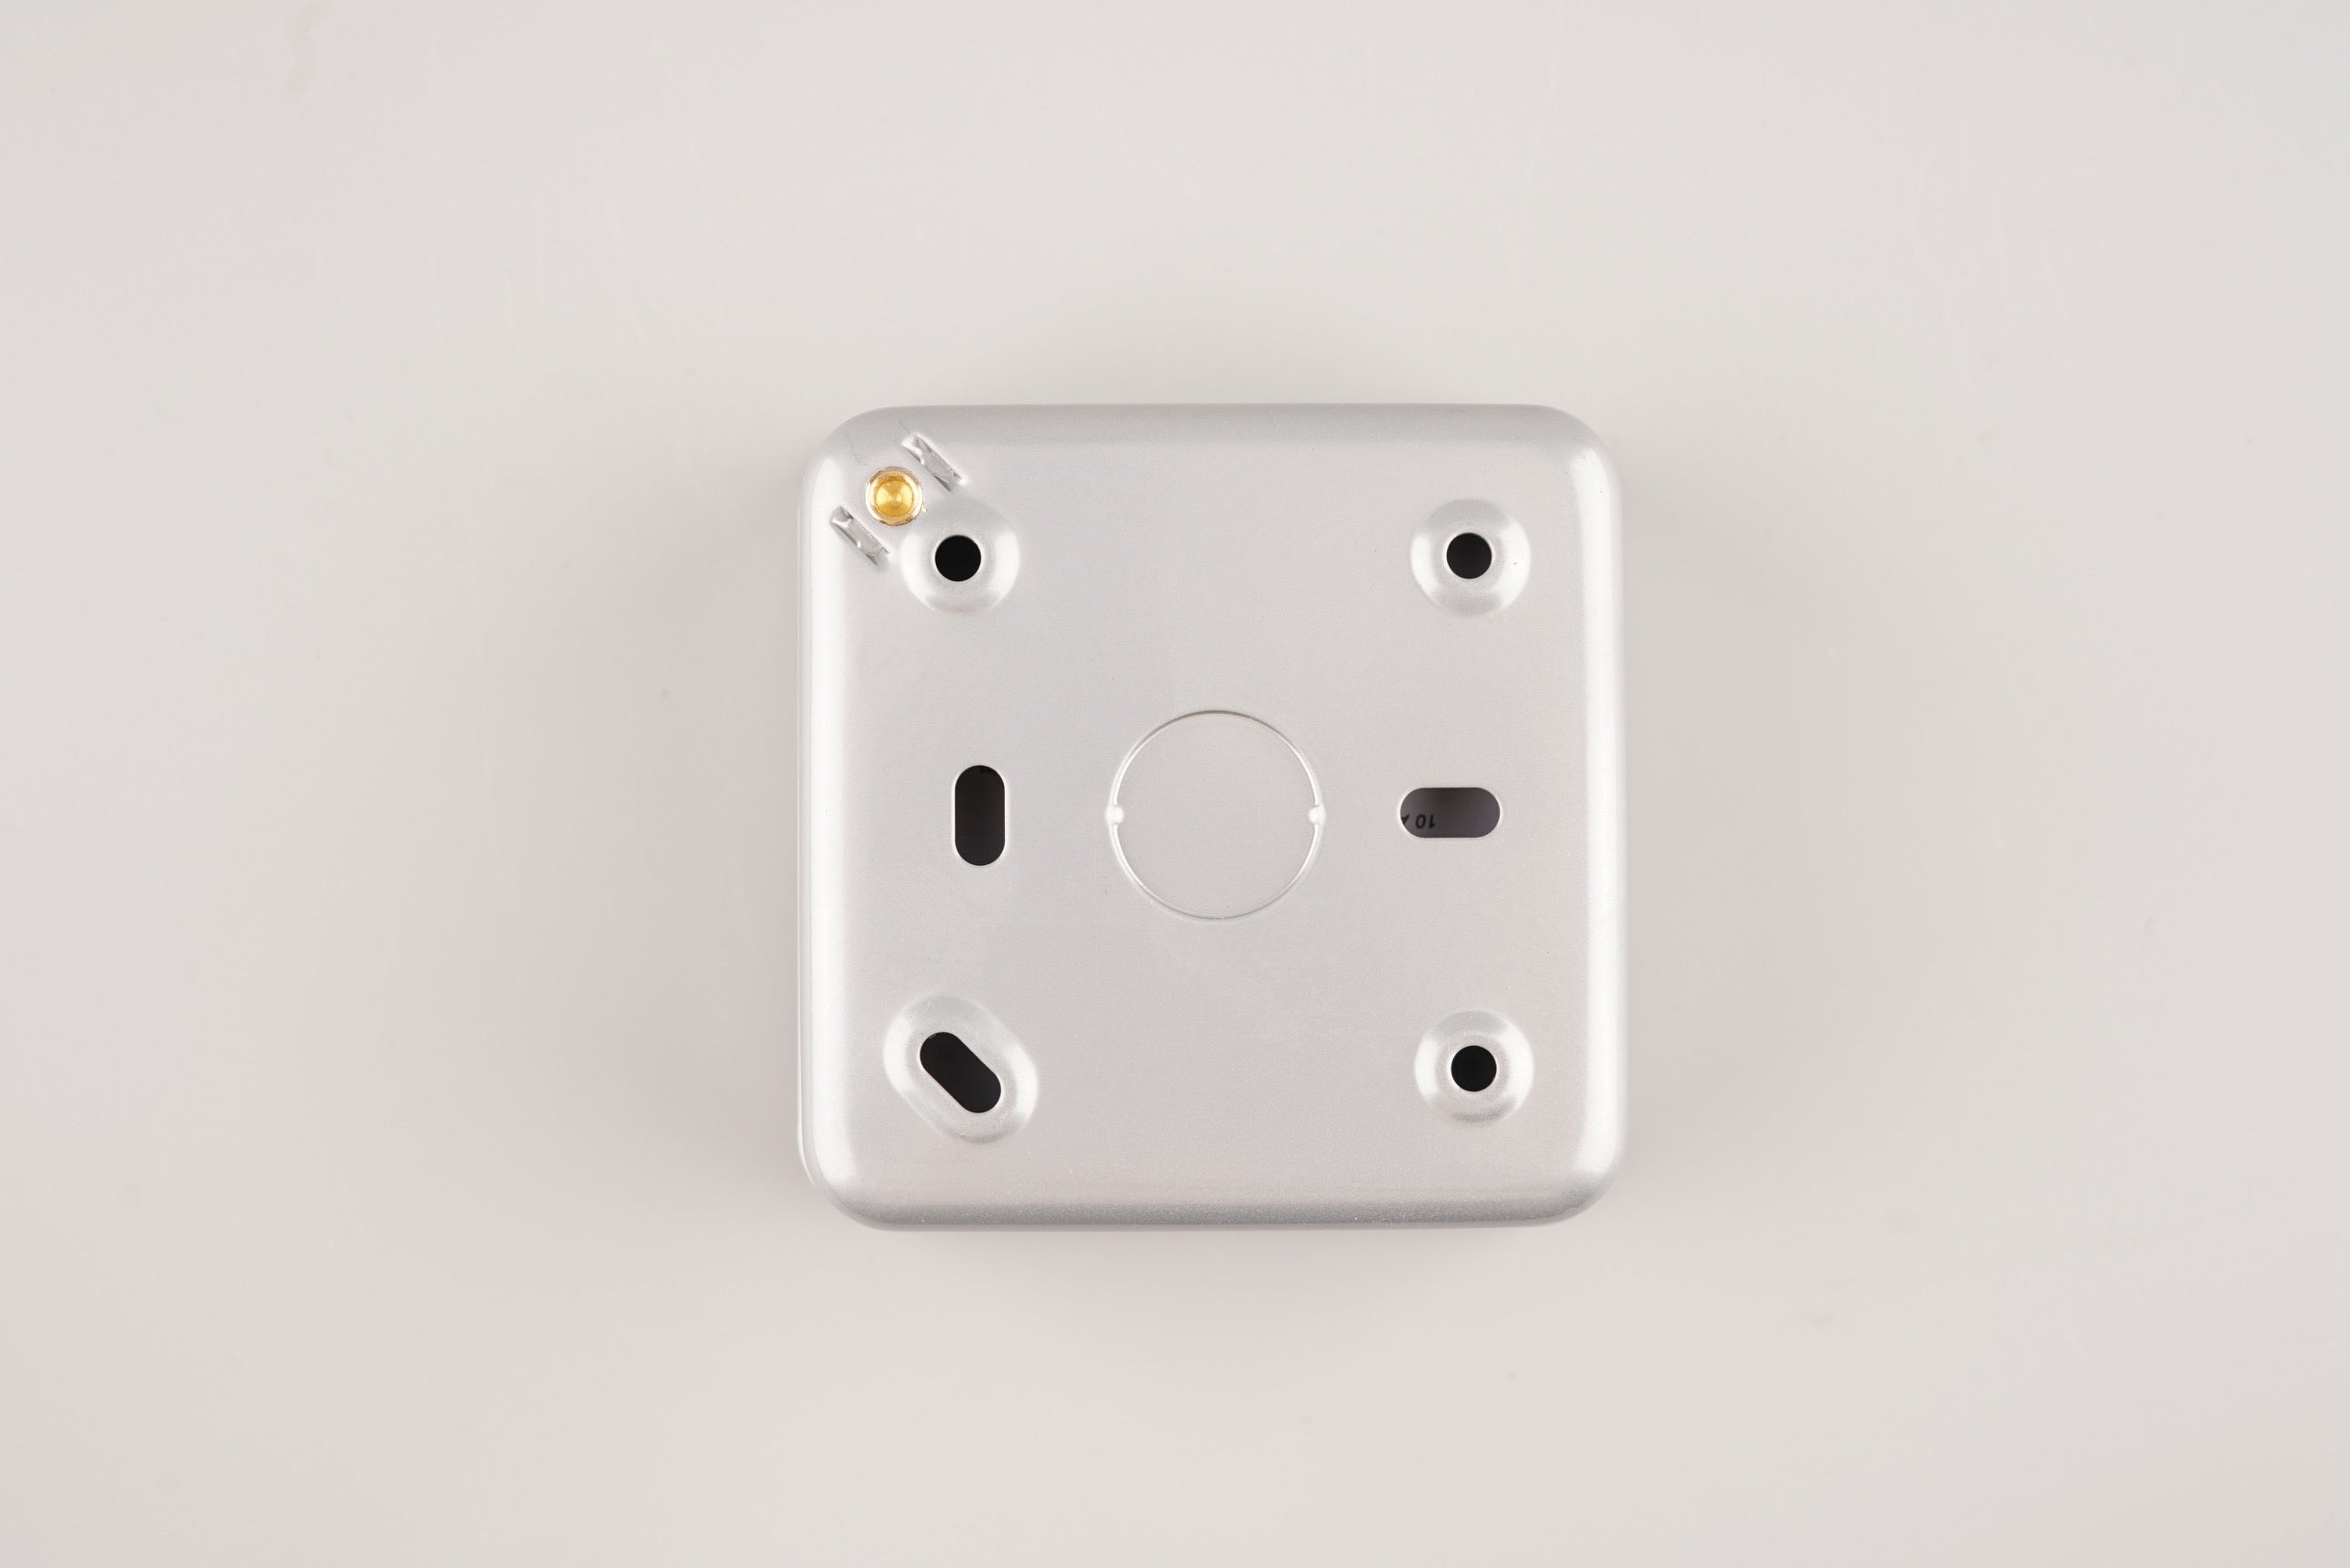 13A Metal Clad Single Wall Socket with switch - ENER-J Smart Home